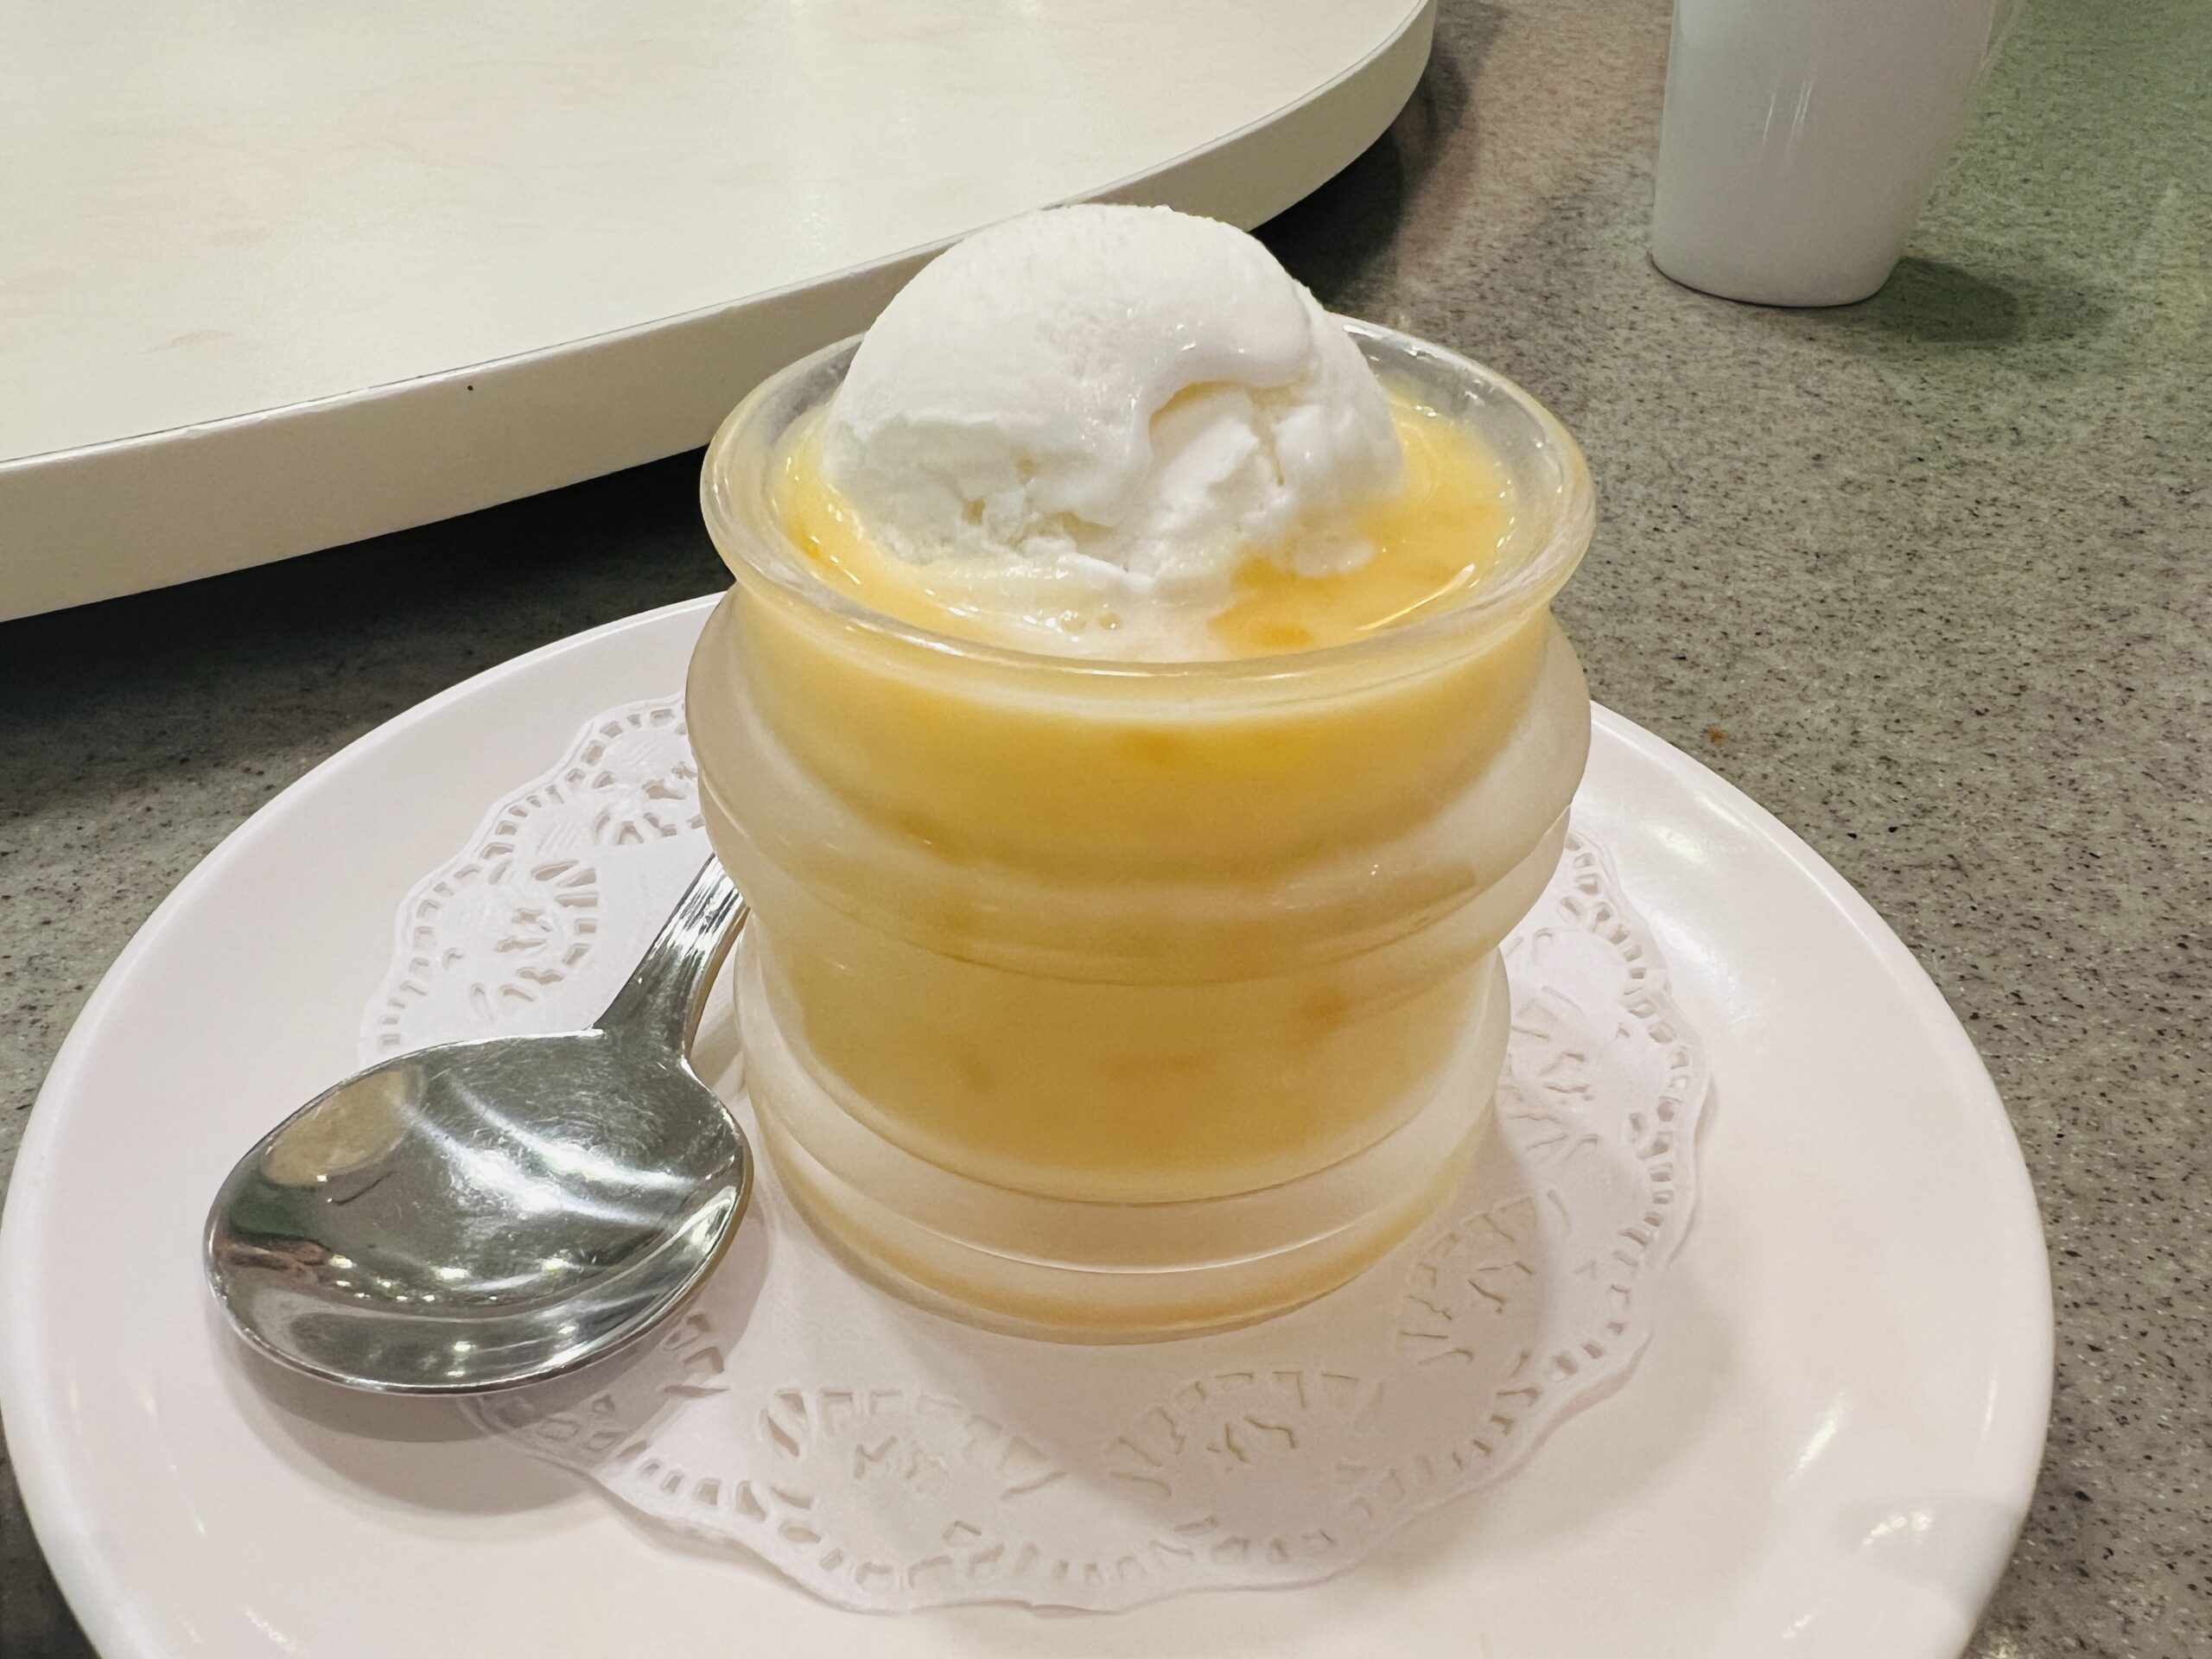 TongLok Teahouse - Chilled Mango Cream with Pomelo and Sago topped with Ice-Cream